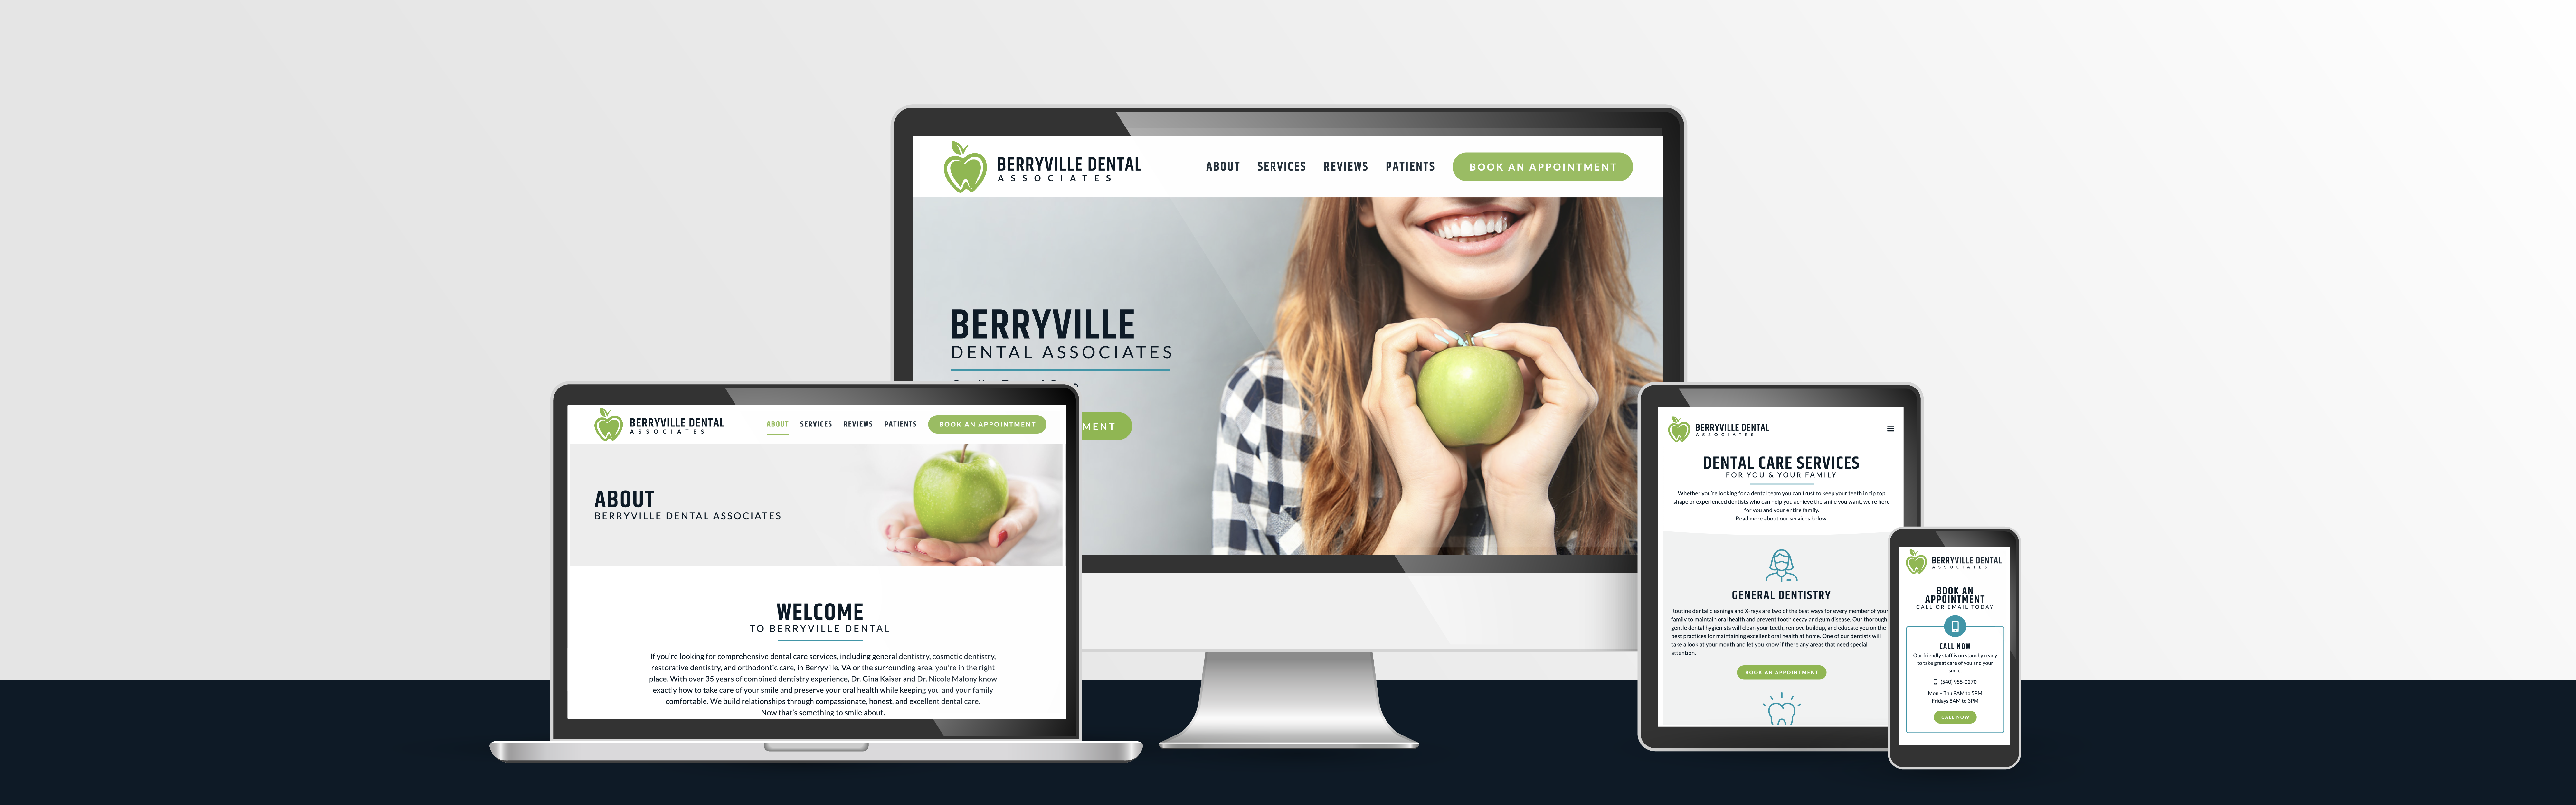 A responsive website design for Berryville Dental Associates displayed across multiple devices, including a desktop computer, a laptop, a tablet, and a smartphone.